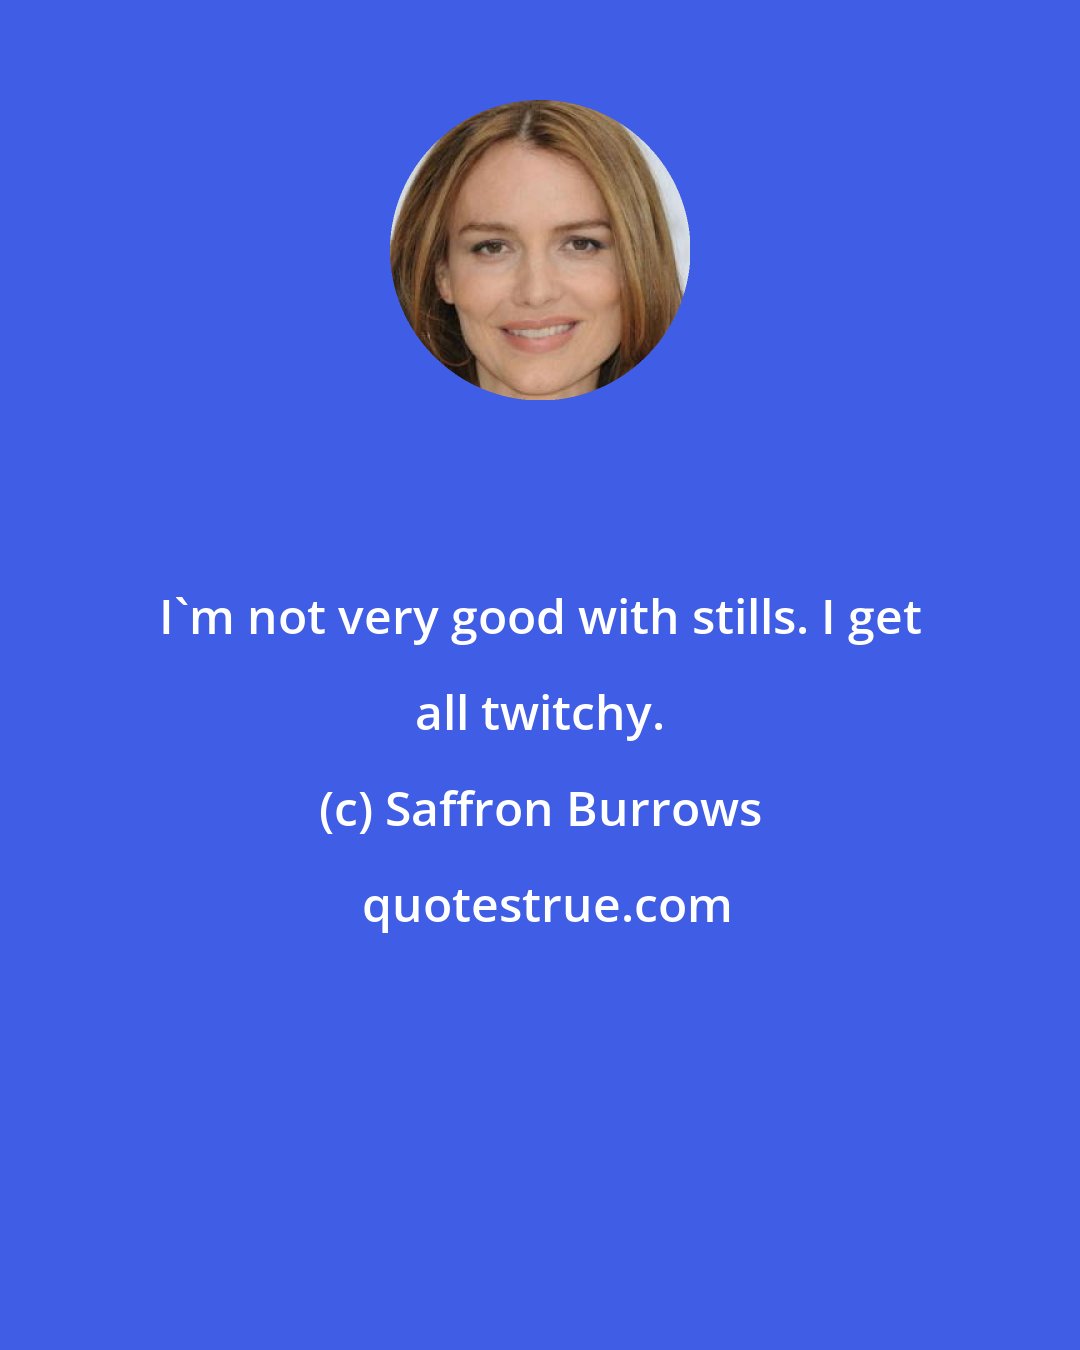 Saffron Burrows: I'm not very good with stills. I get all twitchy.